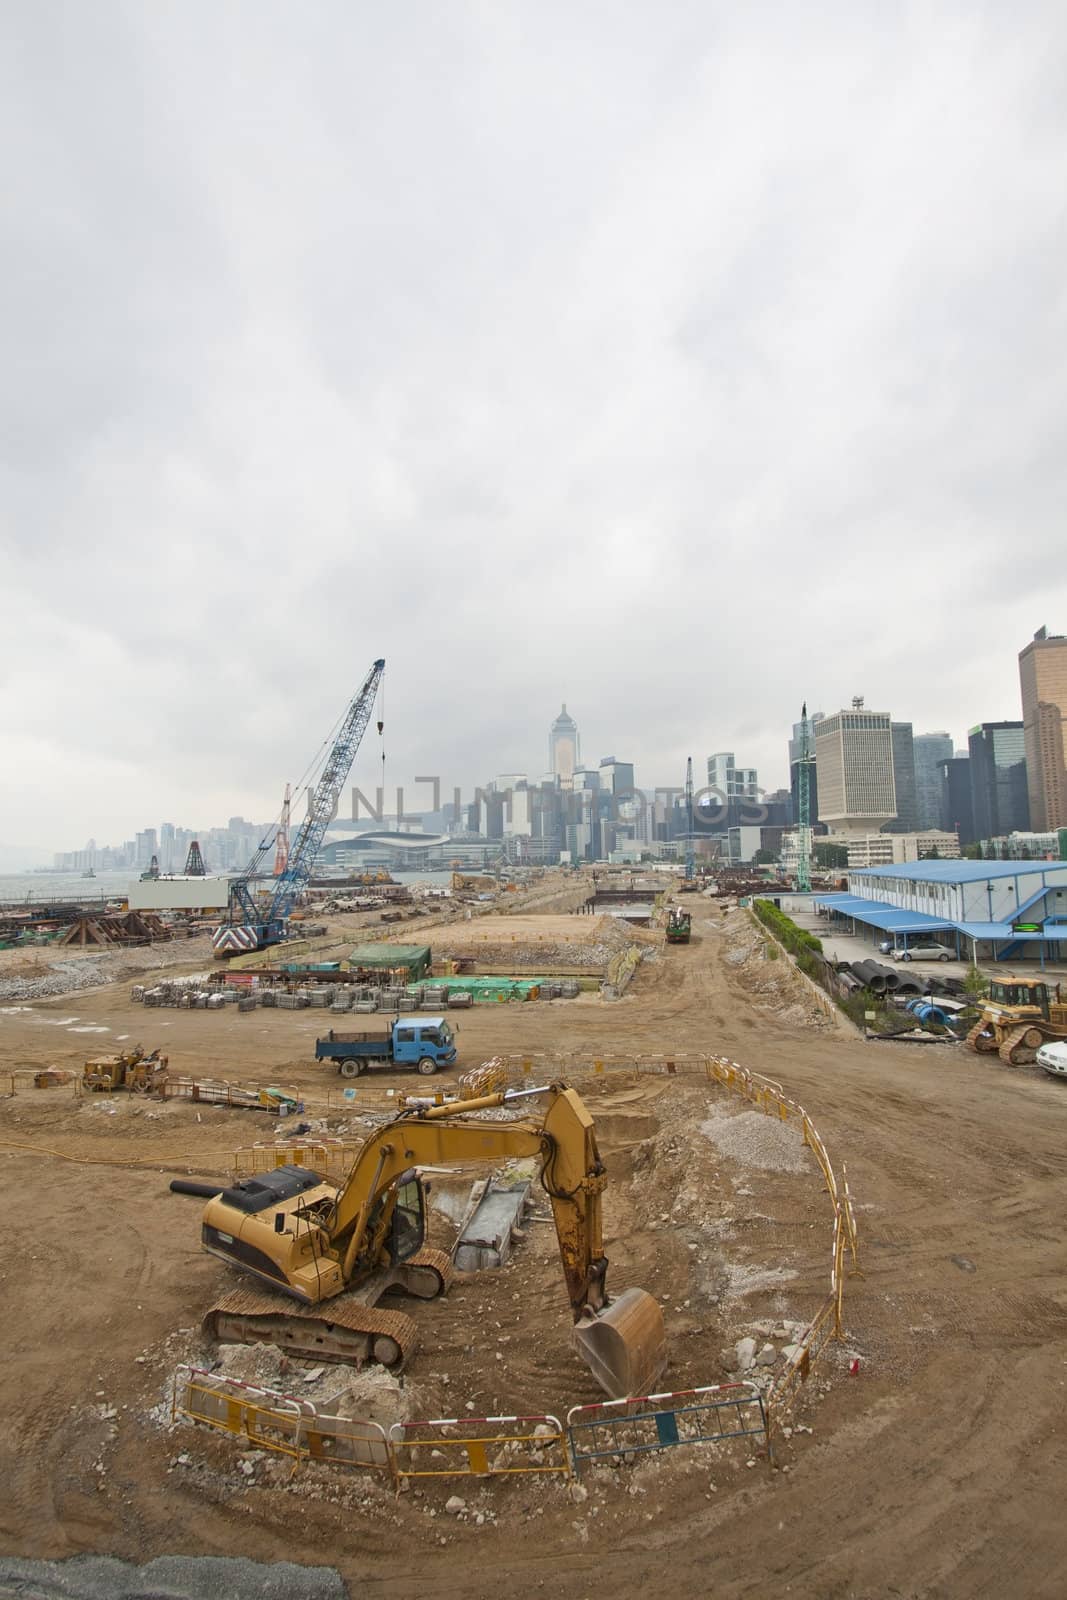 Construction site for new highway in Hong Kong by kawing921